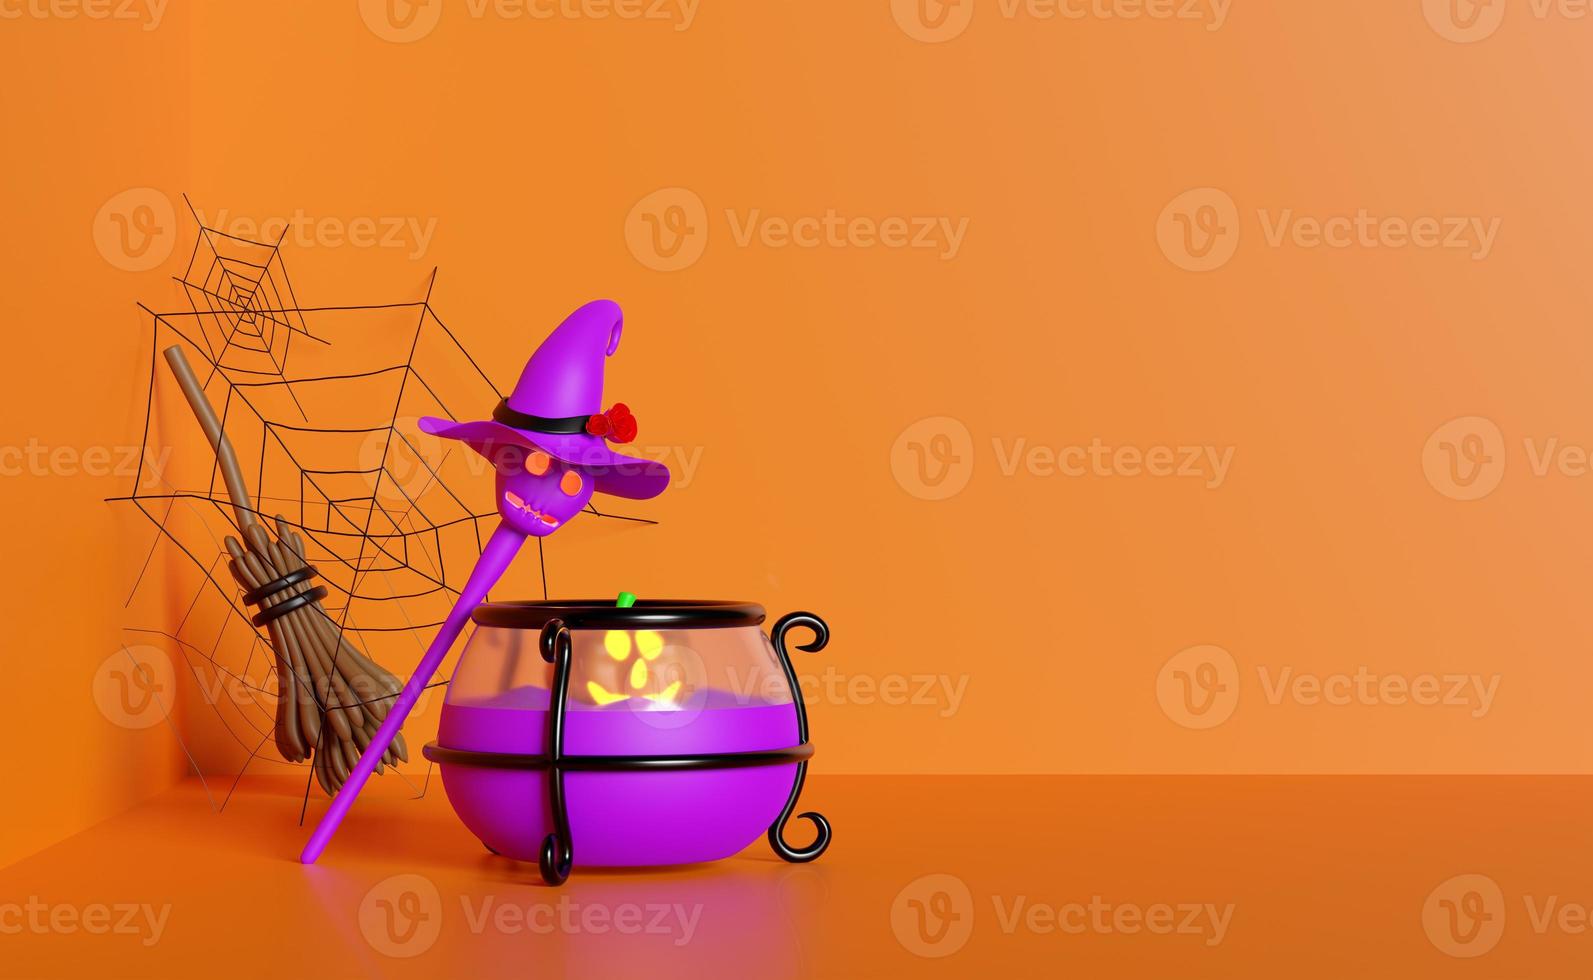 halloween pumpkin holiday party with 3d pumpkin in boiling pot, purple witch pointed hat, broom, skull walking stick for happy halloween, 3d render illustration, isolated on orange room  background. photo